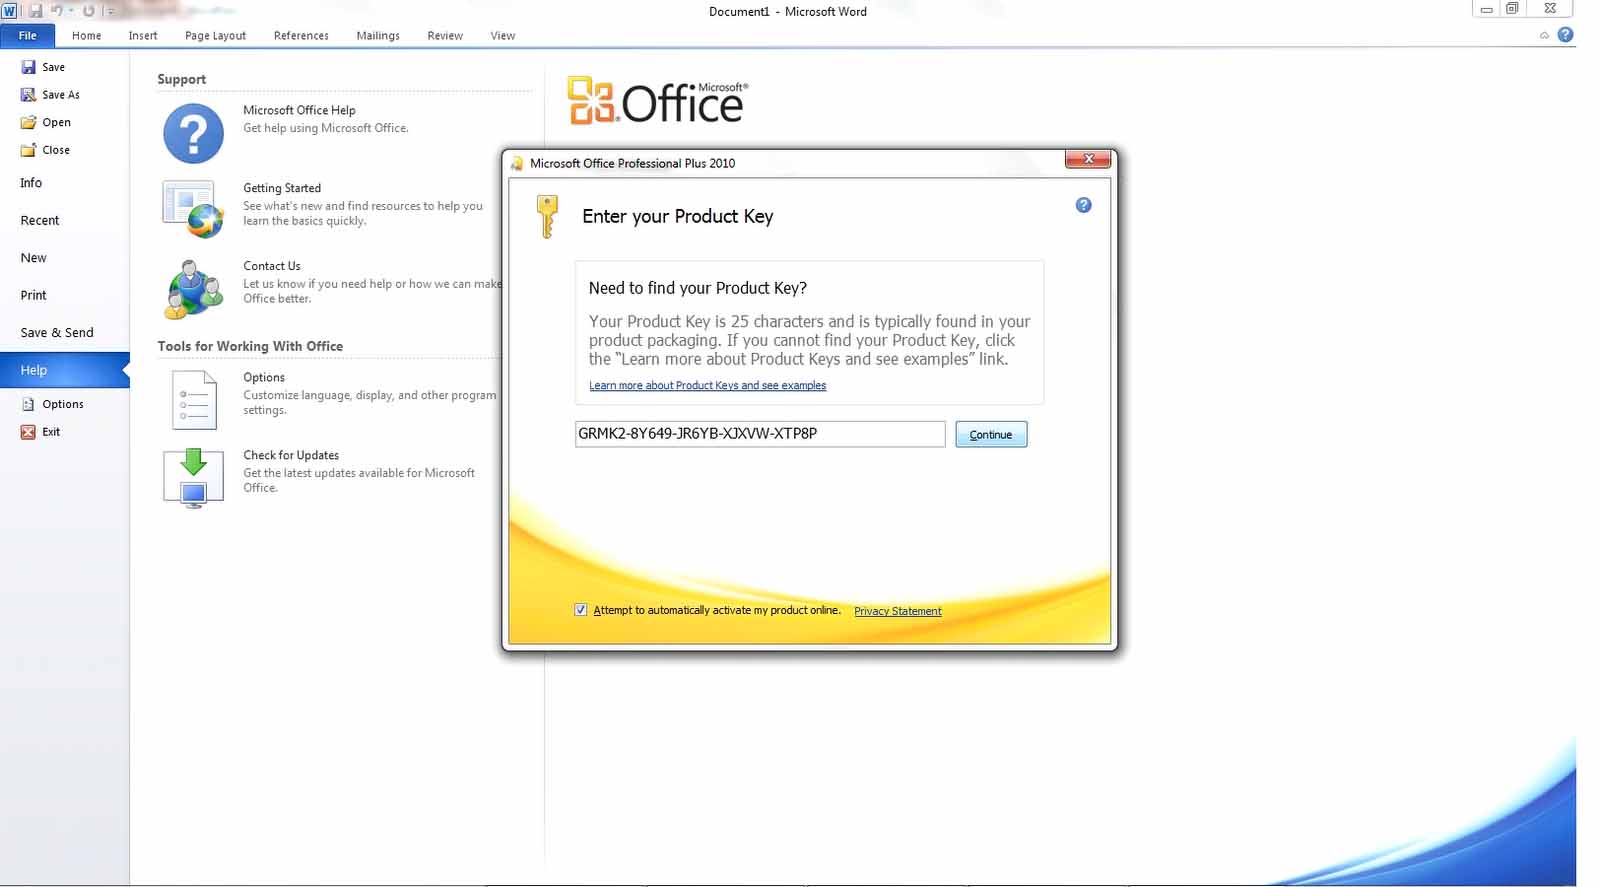 microsoft office 2010 for mac torrent with crack